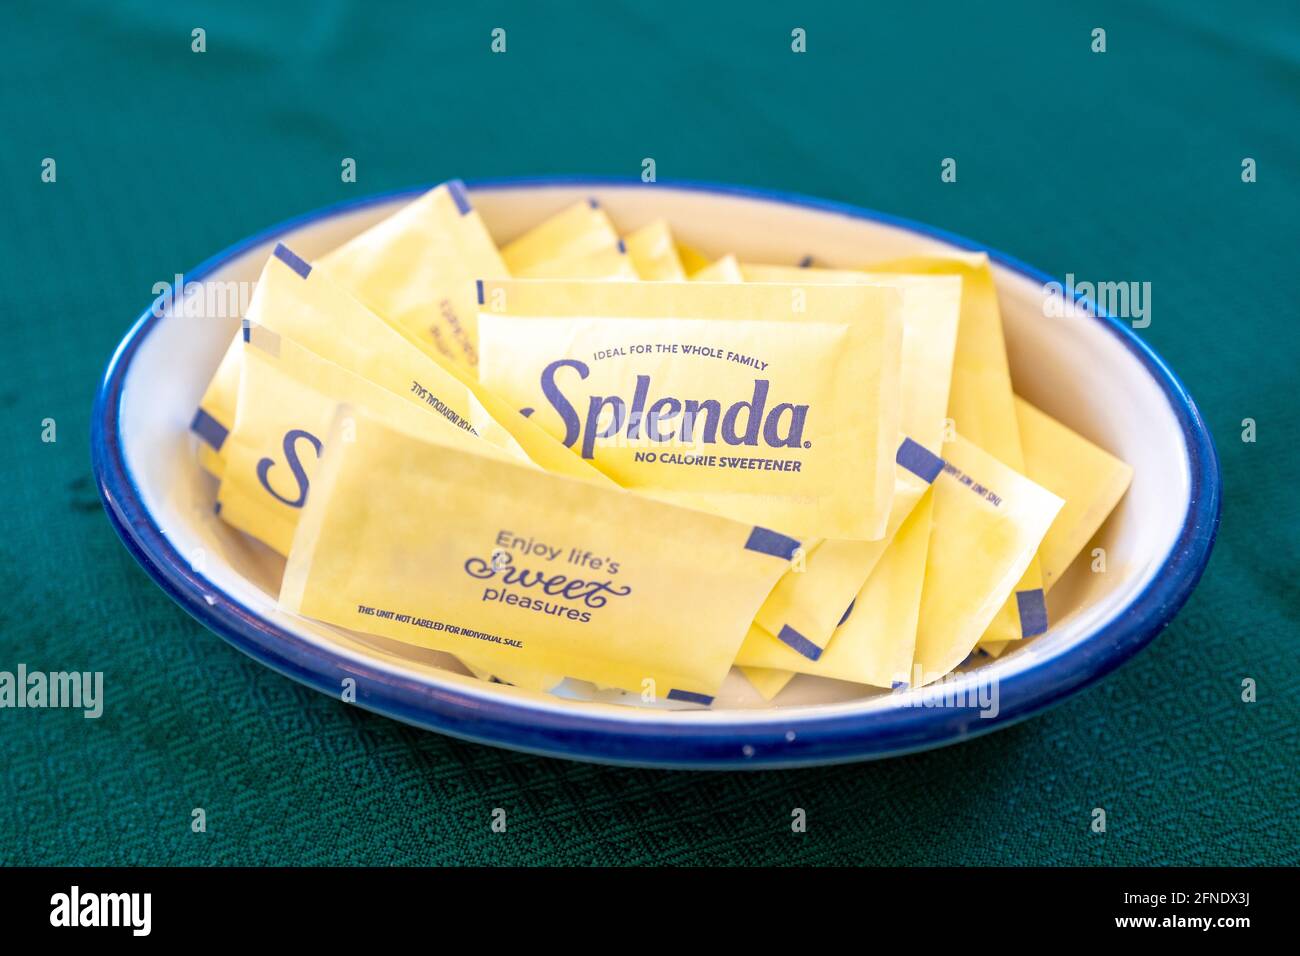 Close-up of single-serve Splenda brand sugar substitute packets, resting in a blue and white plate on a green tablecloth, February 17, 2021. () Stock Photo